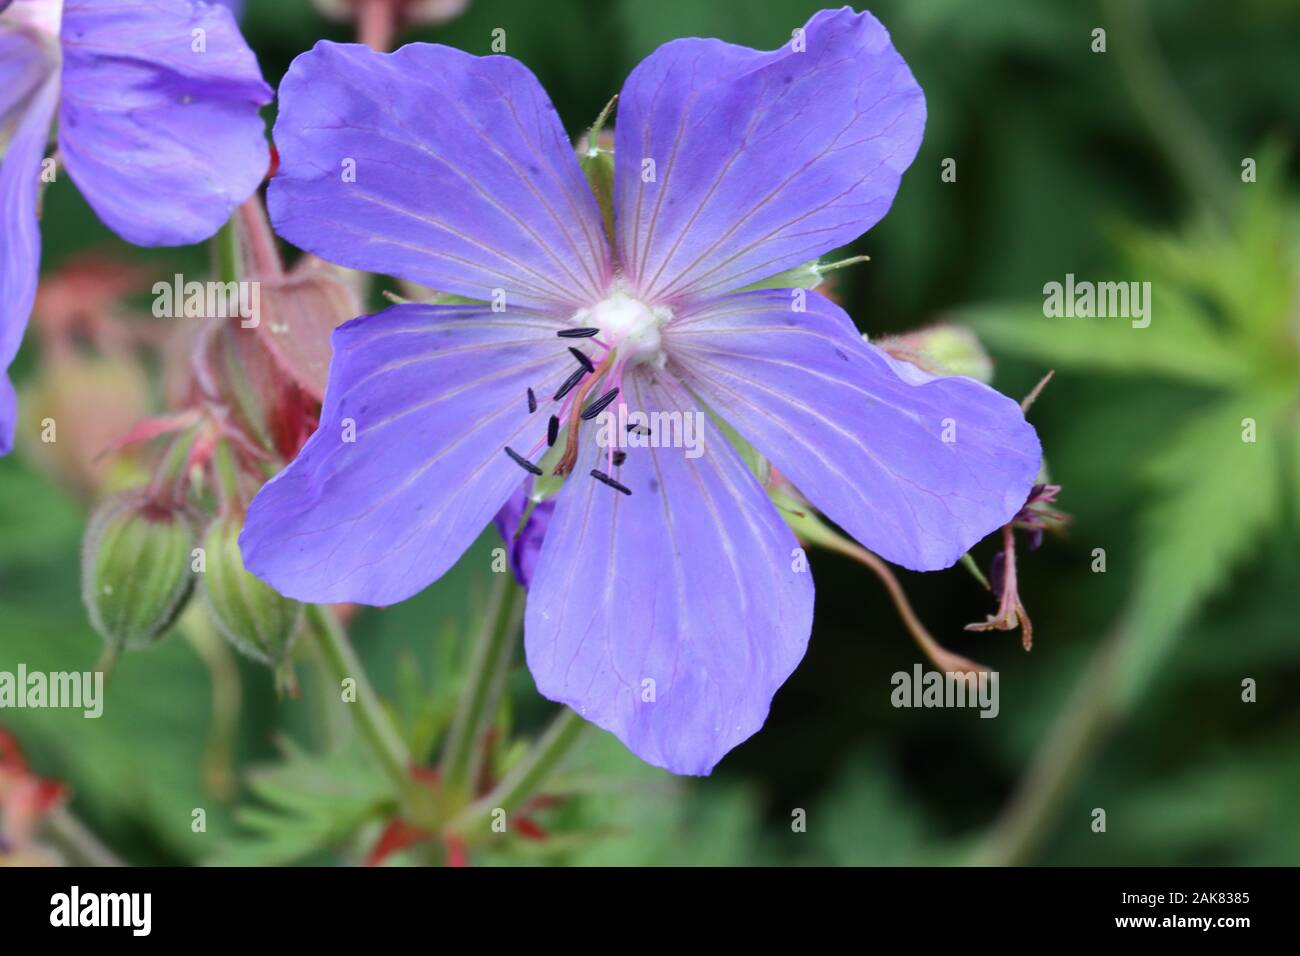 Geranium wallichianum 'Buxton's Variety' is a low herbaceous perennial with trailing stems bearing 5-lobed leaves and light violet-blue flowers. Stock Photo